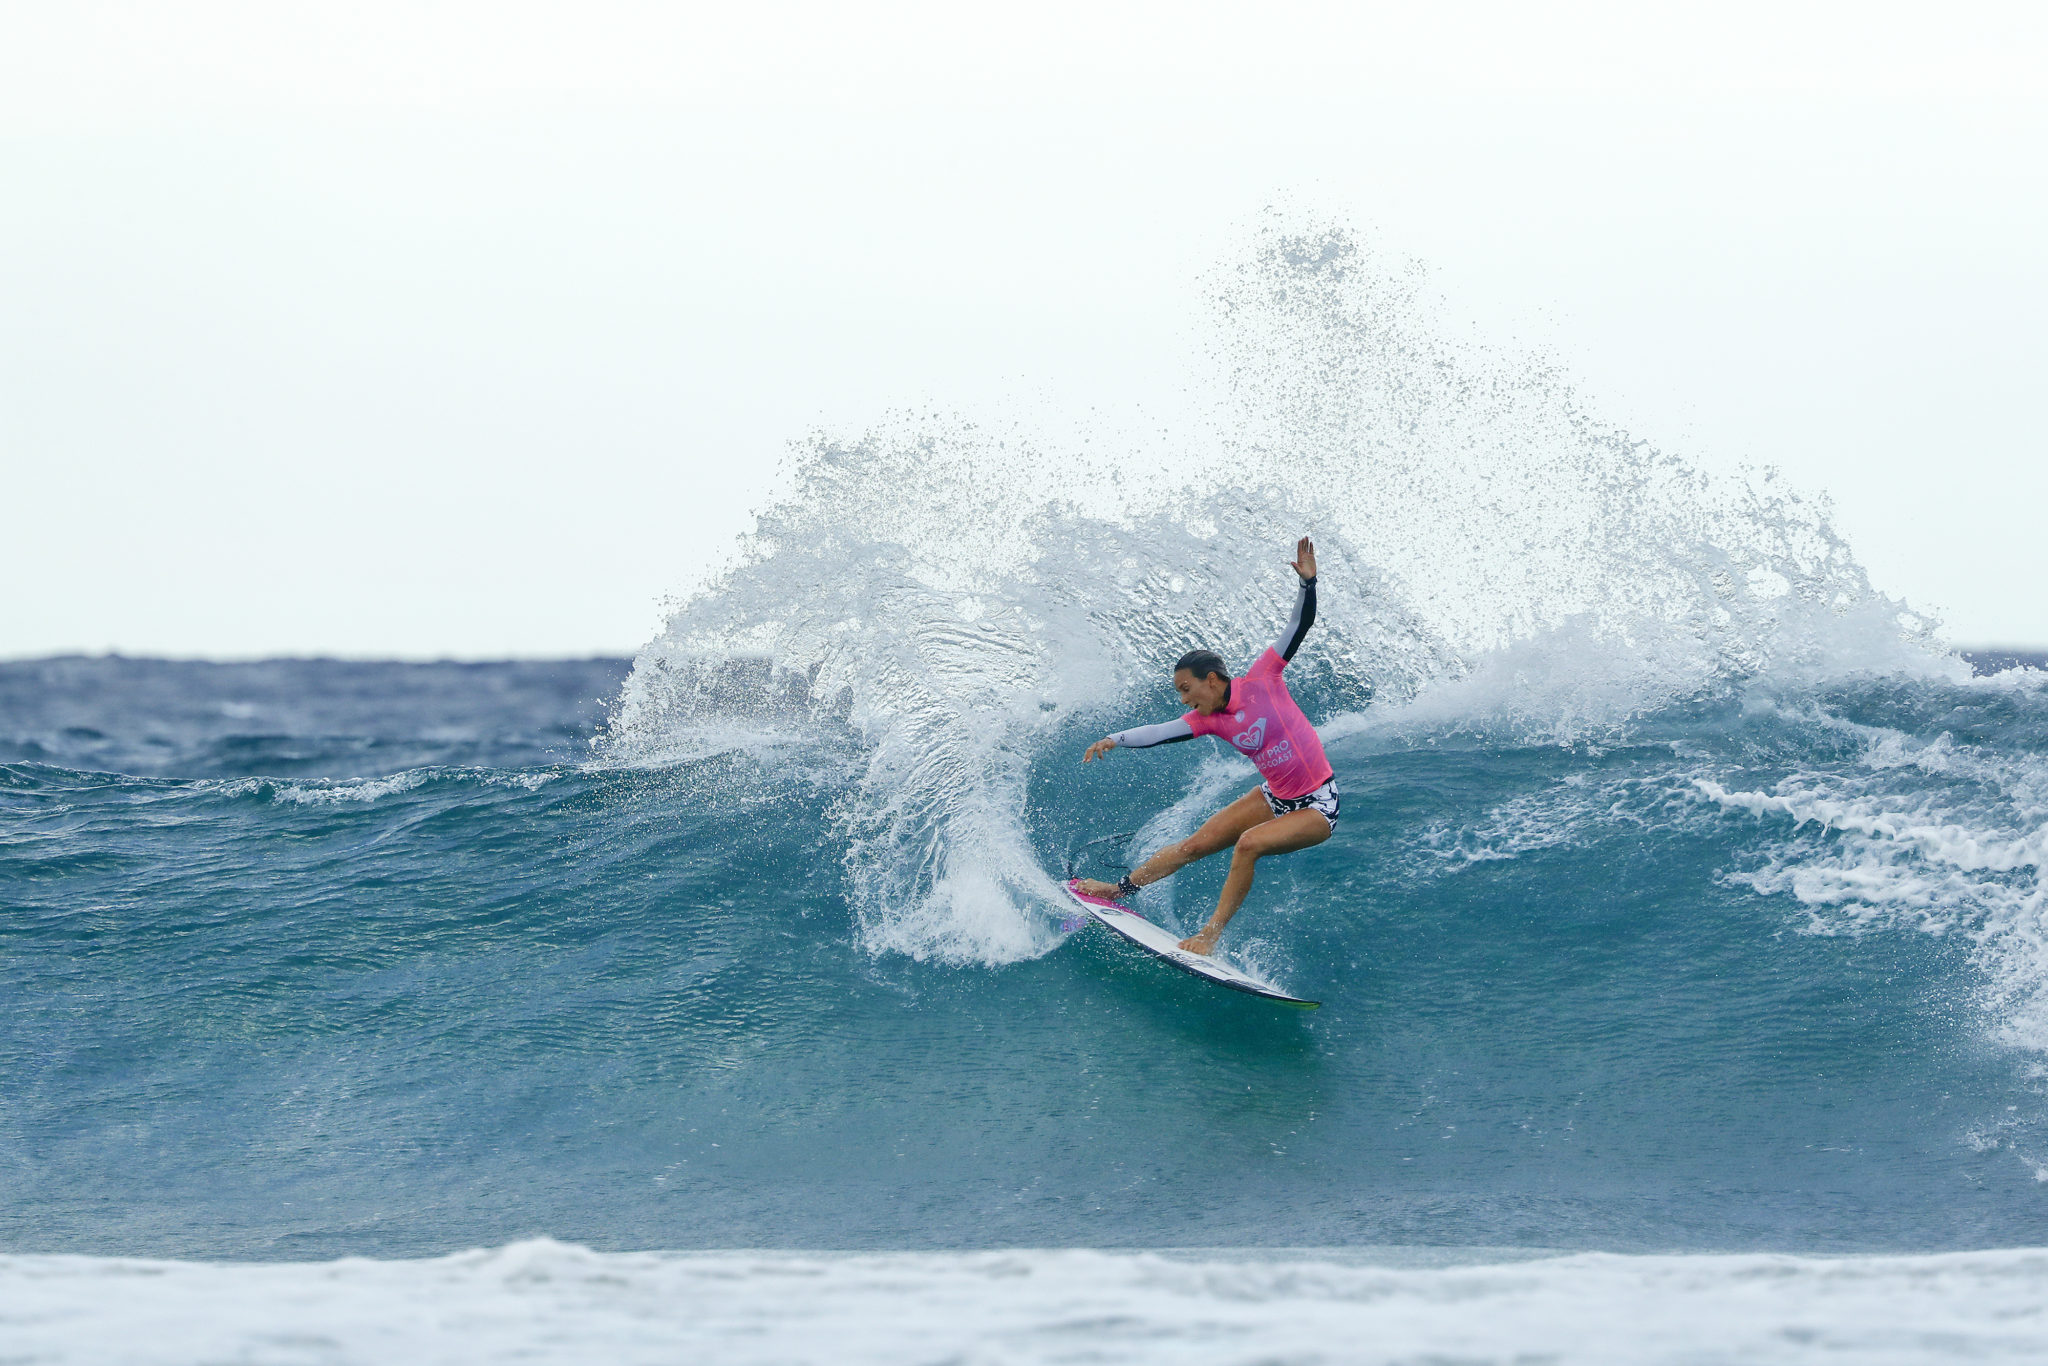 Sally Fitzgibbons of Australia advanced to the quarterfinals after winning Heat 3 of Round Four at the Roxy Pro Gold Coast, Australia.